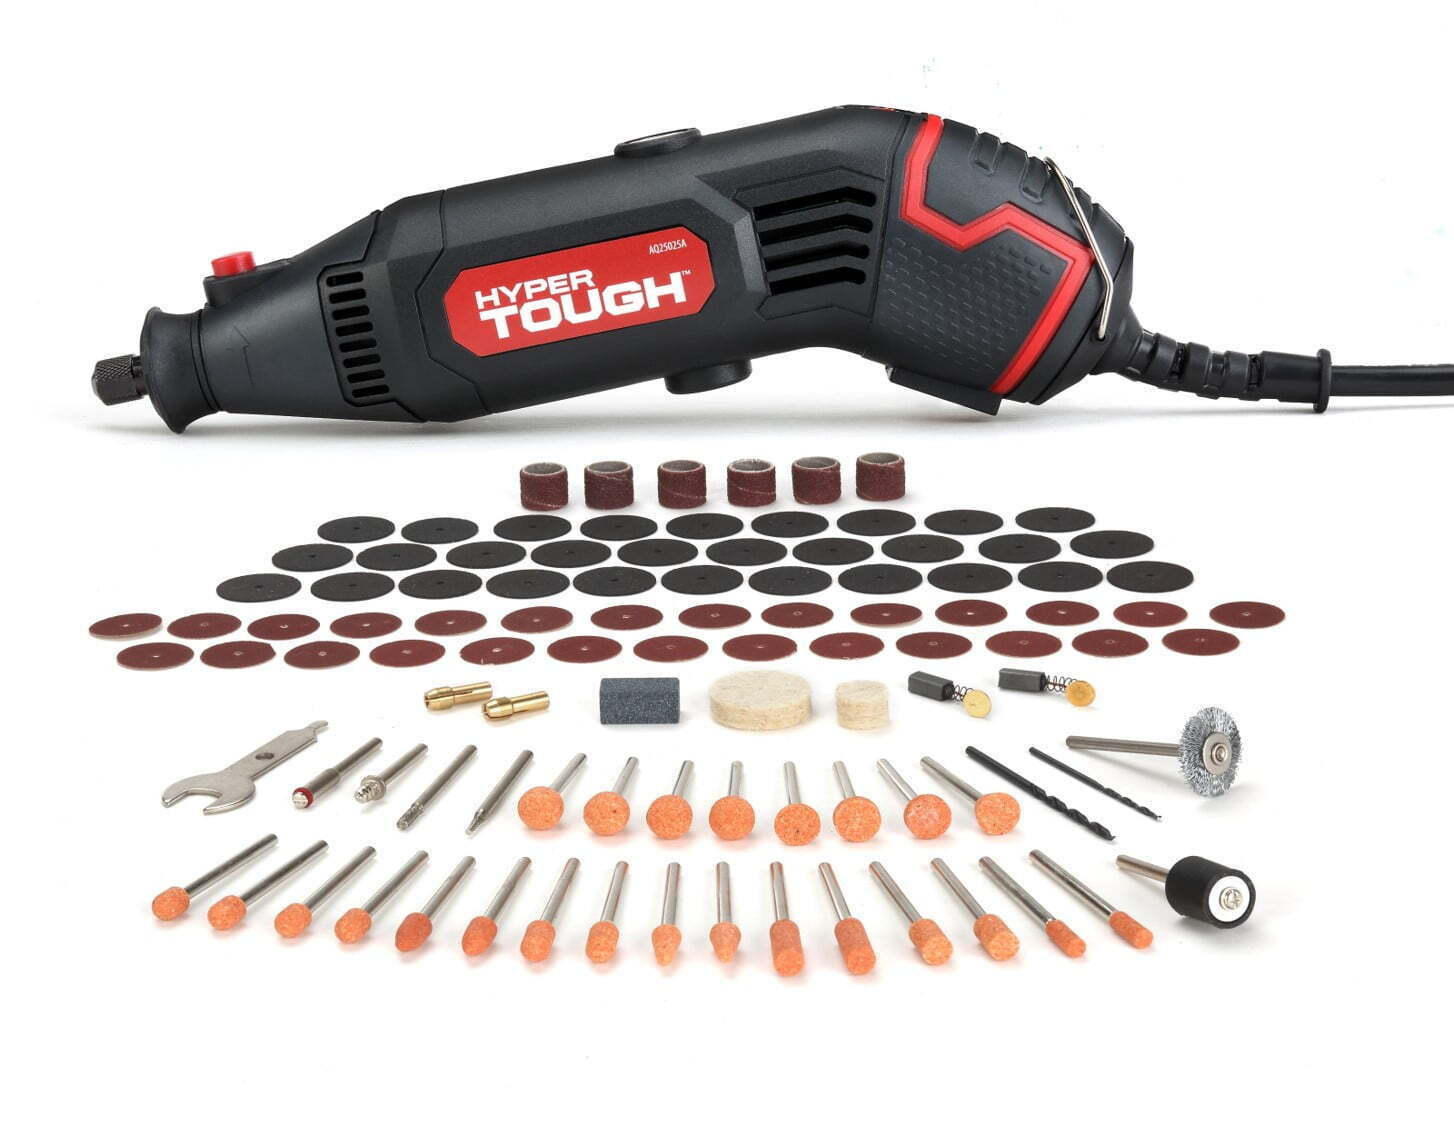 Hyper Tough 1.5 Amp Corded Rotary Tool,  Storage Case, 120 Volts